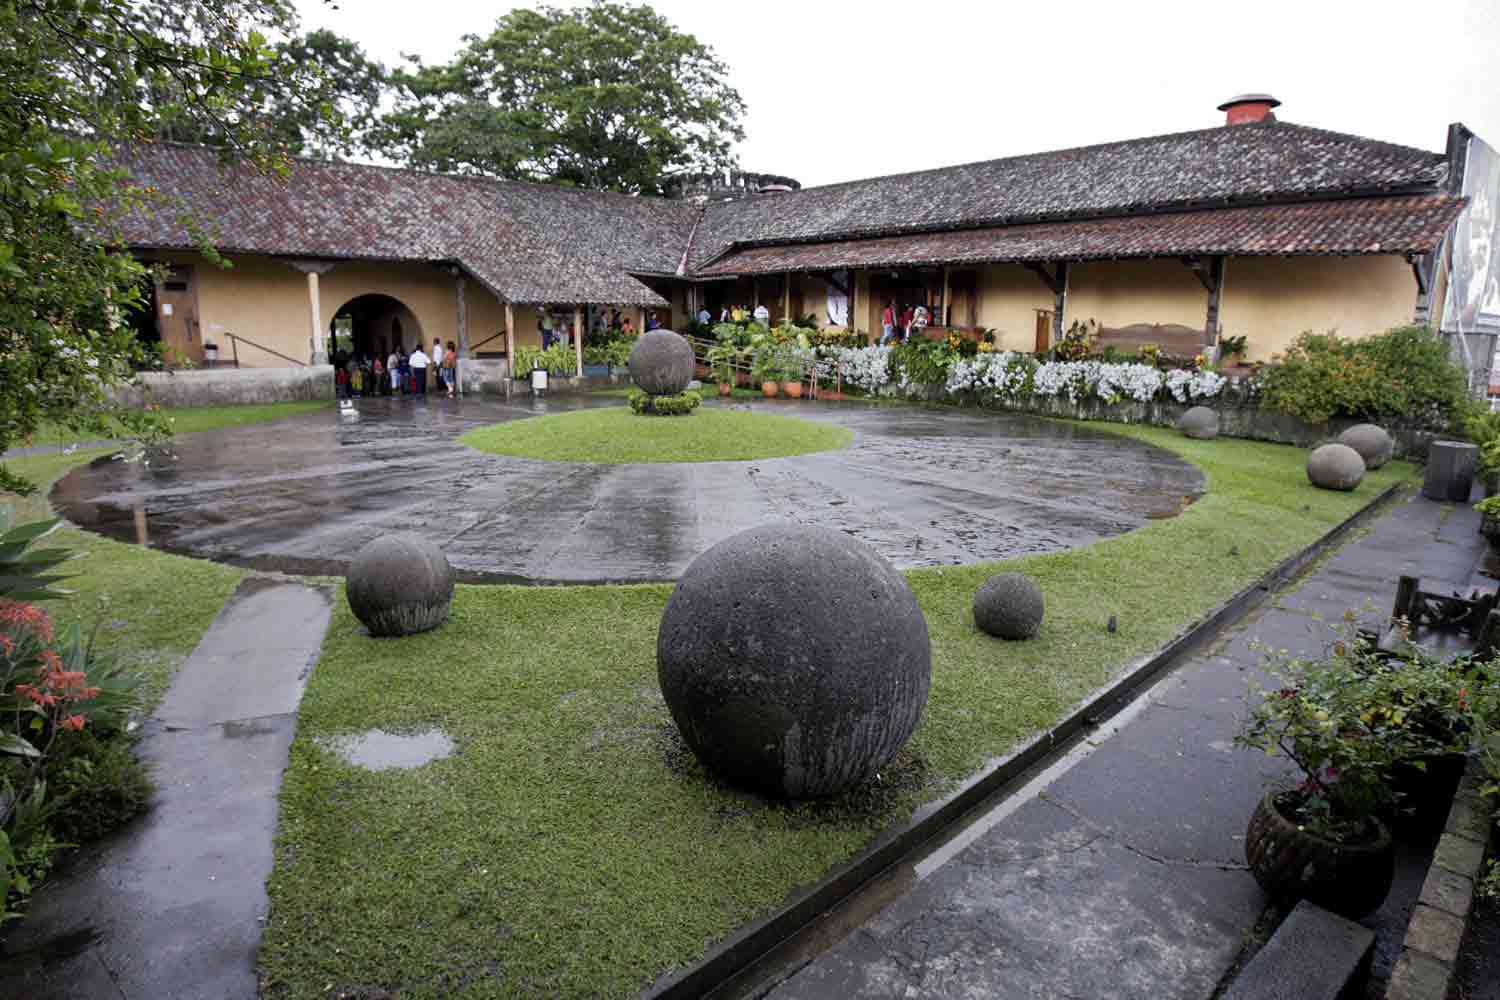 Several stone spheres of different sizes are on the grounds of a building.